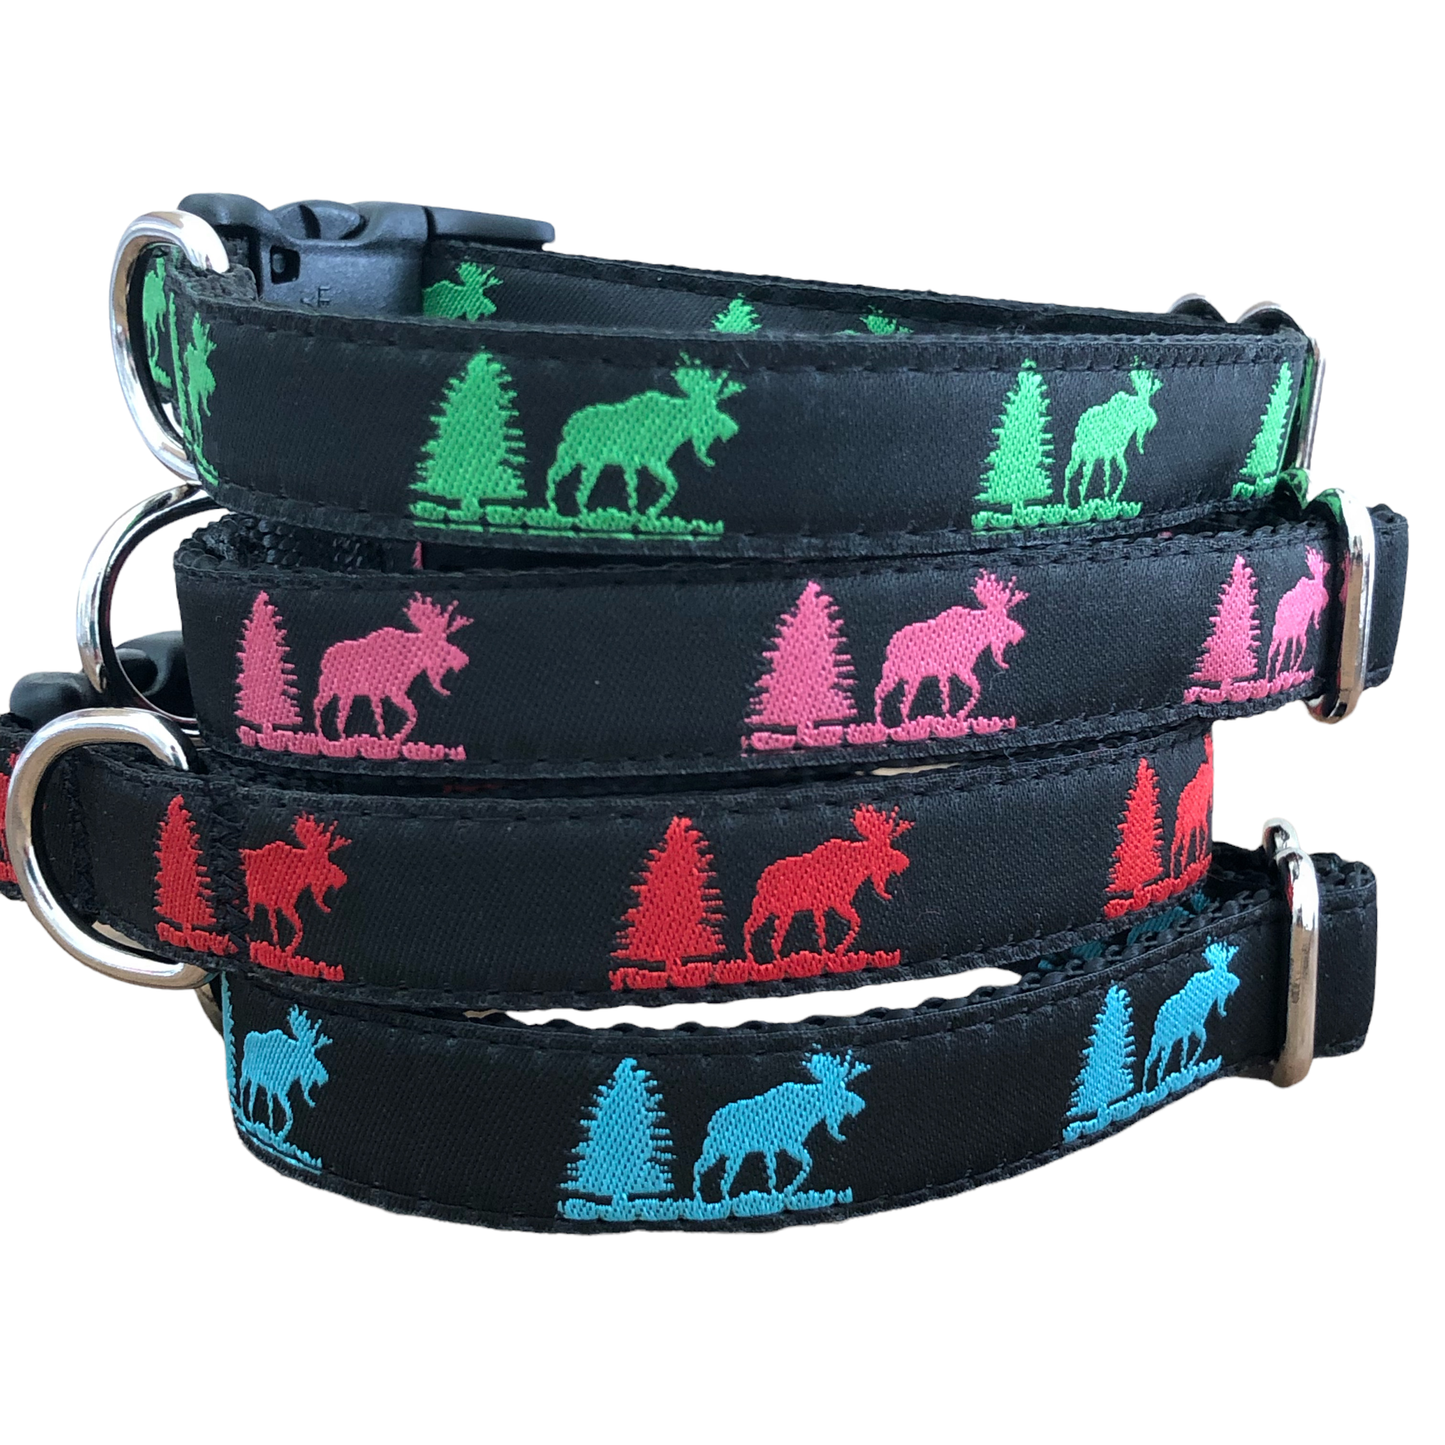 Maine Moose Dog Collar and Leashes, Black With Colored Moose: 60" Leash / green